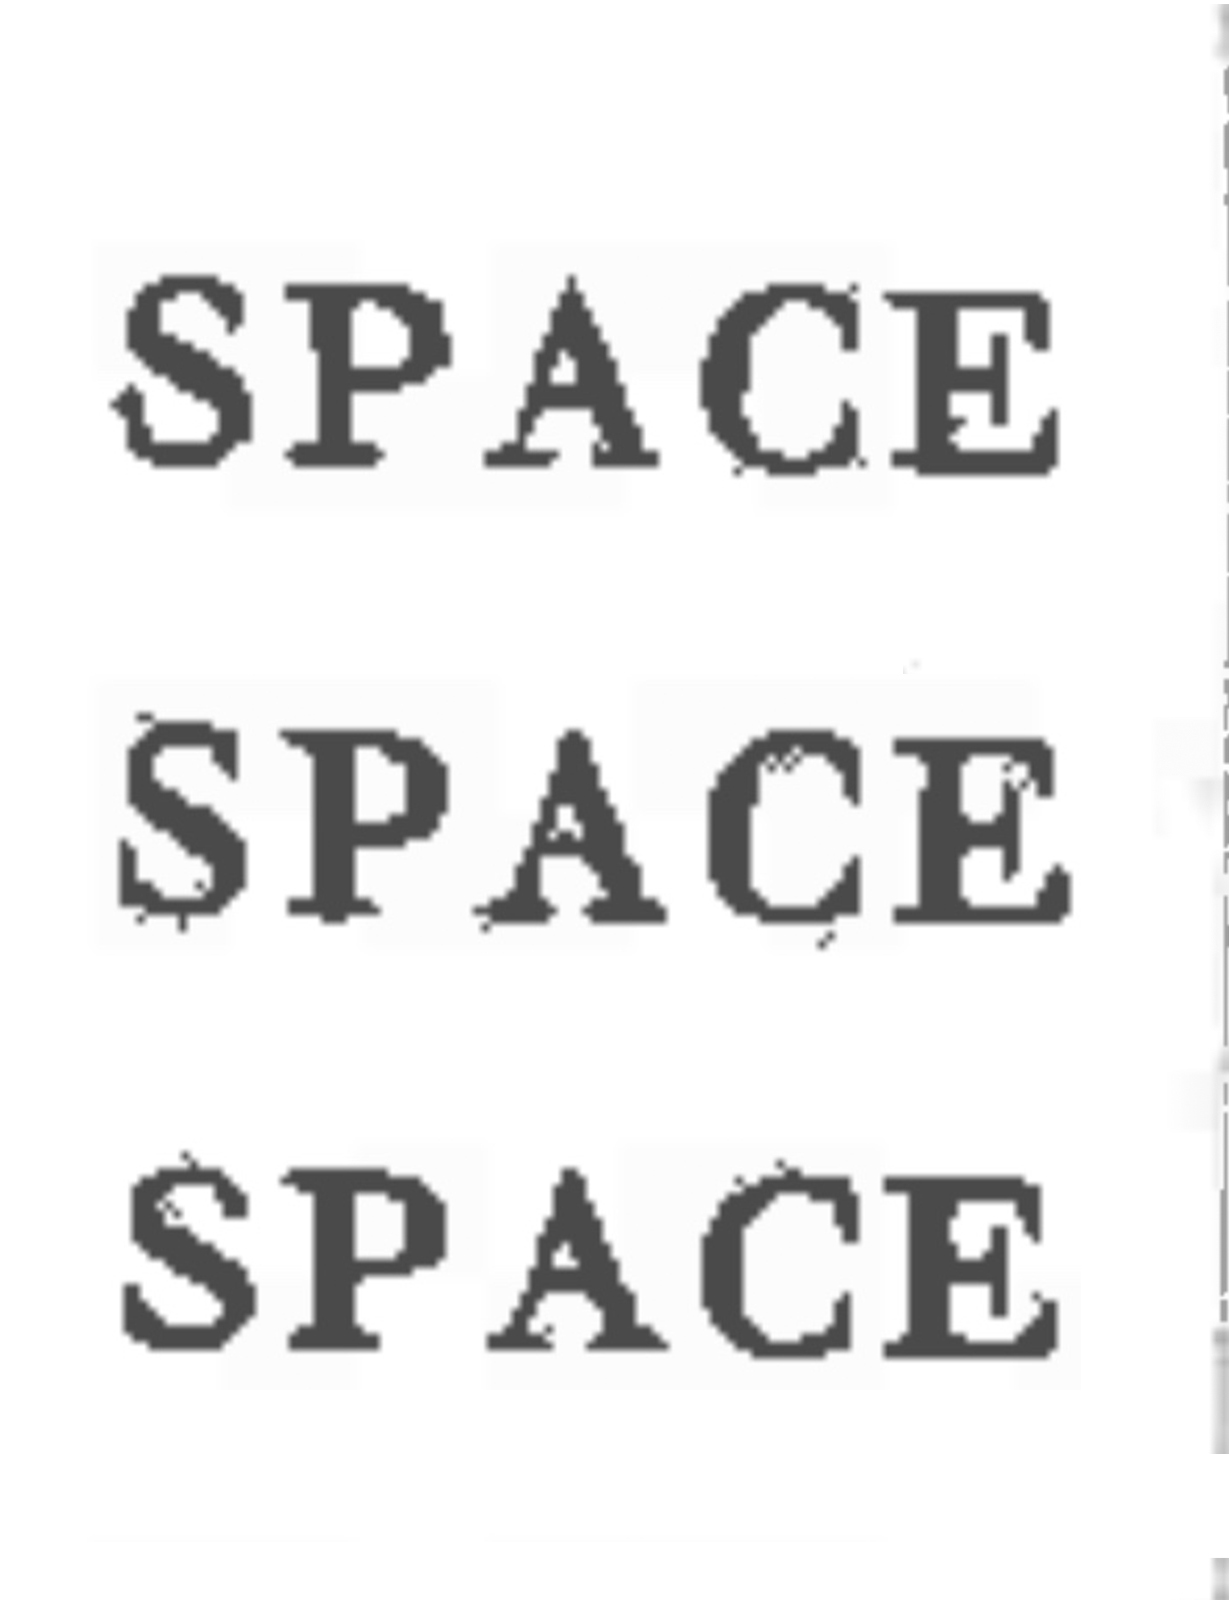 In a book-like format, six iterations of the word SPACE are spread across a central pixelated image of a margin.